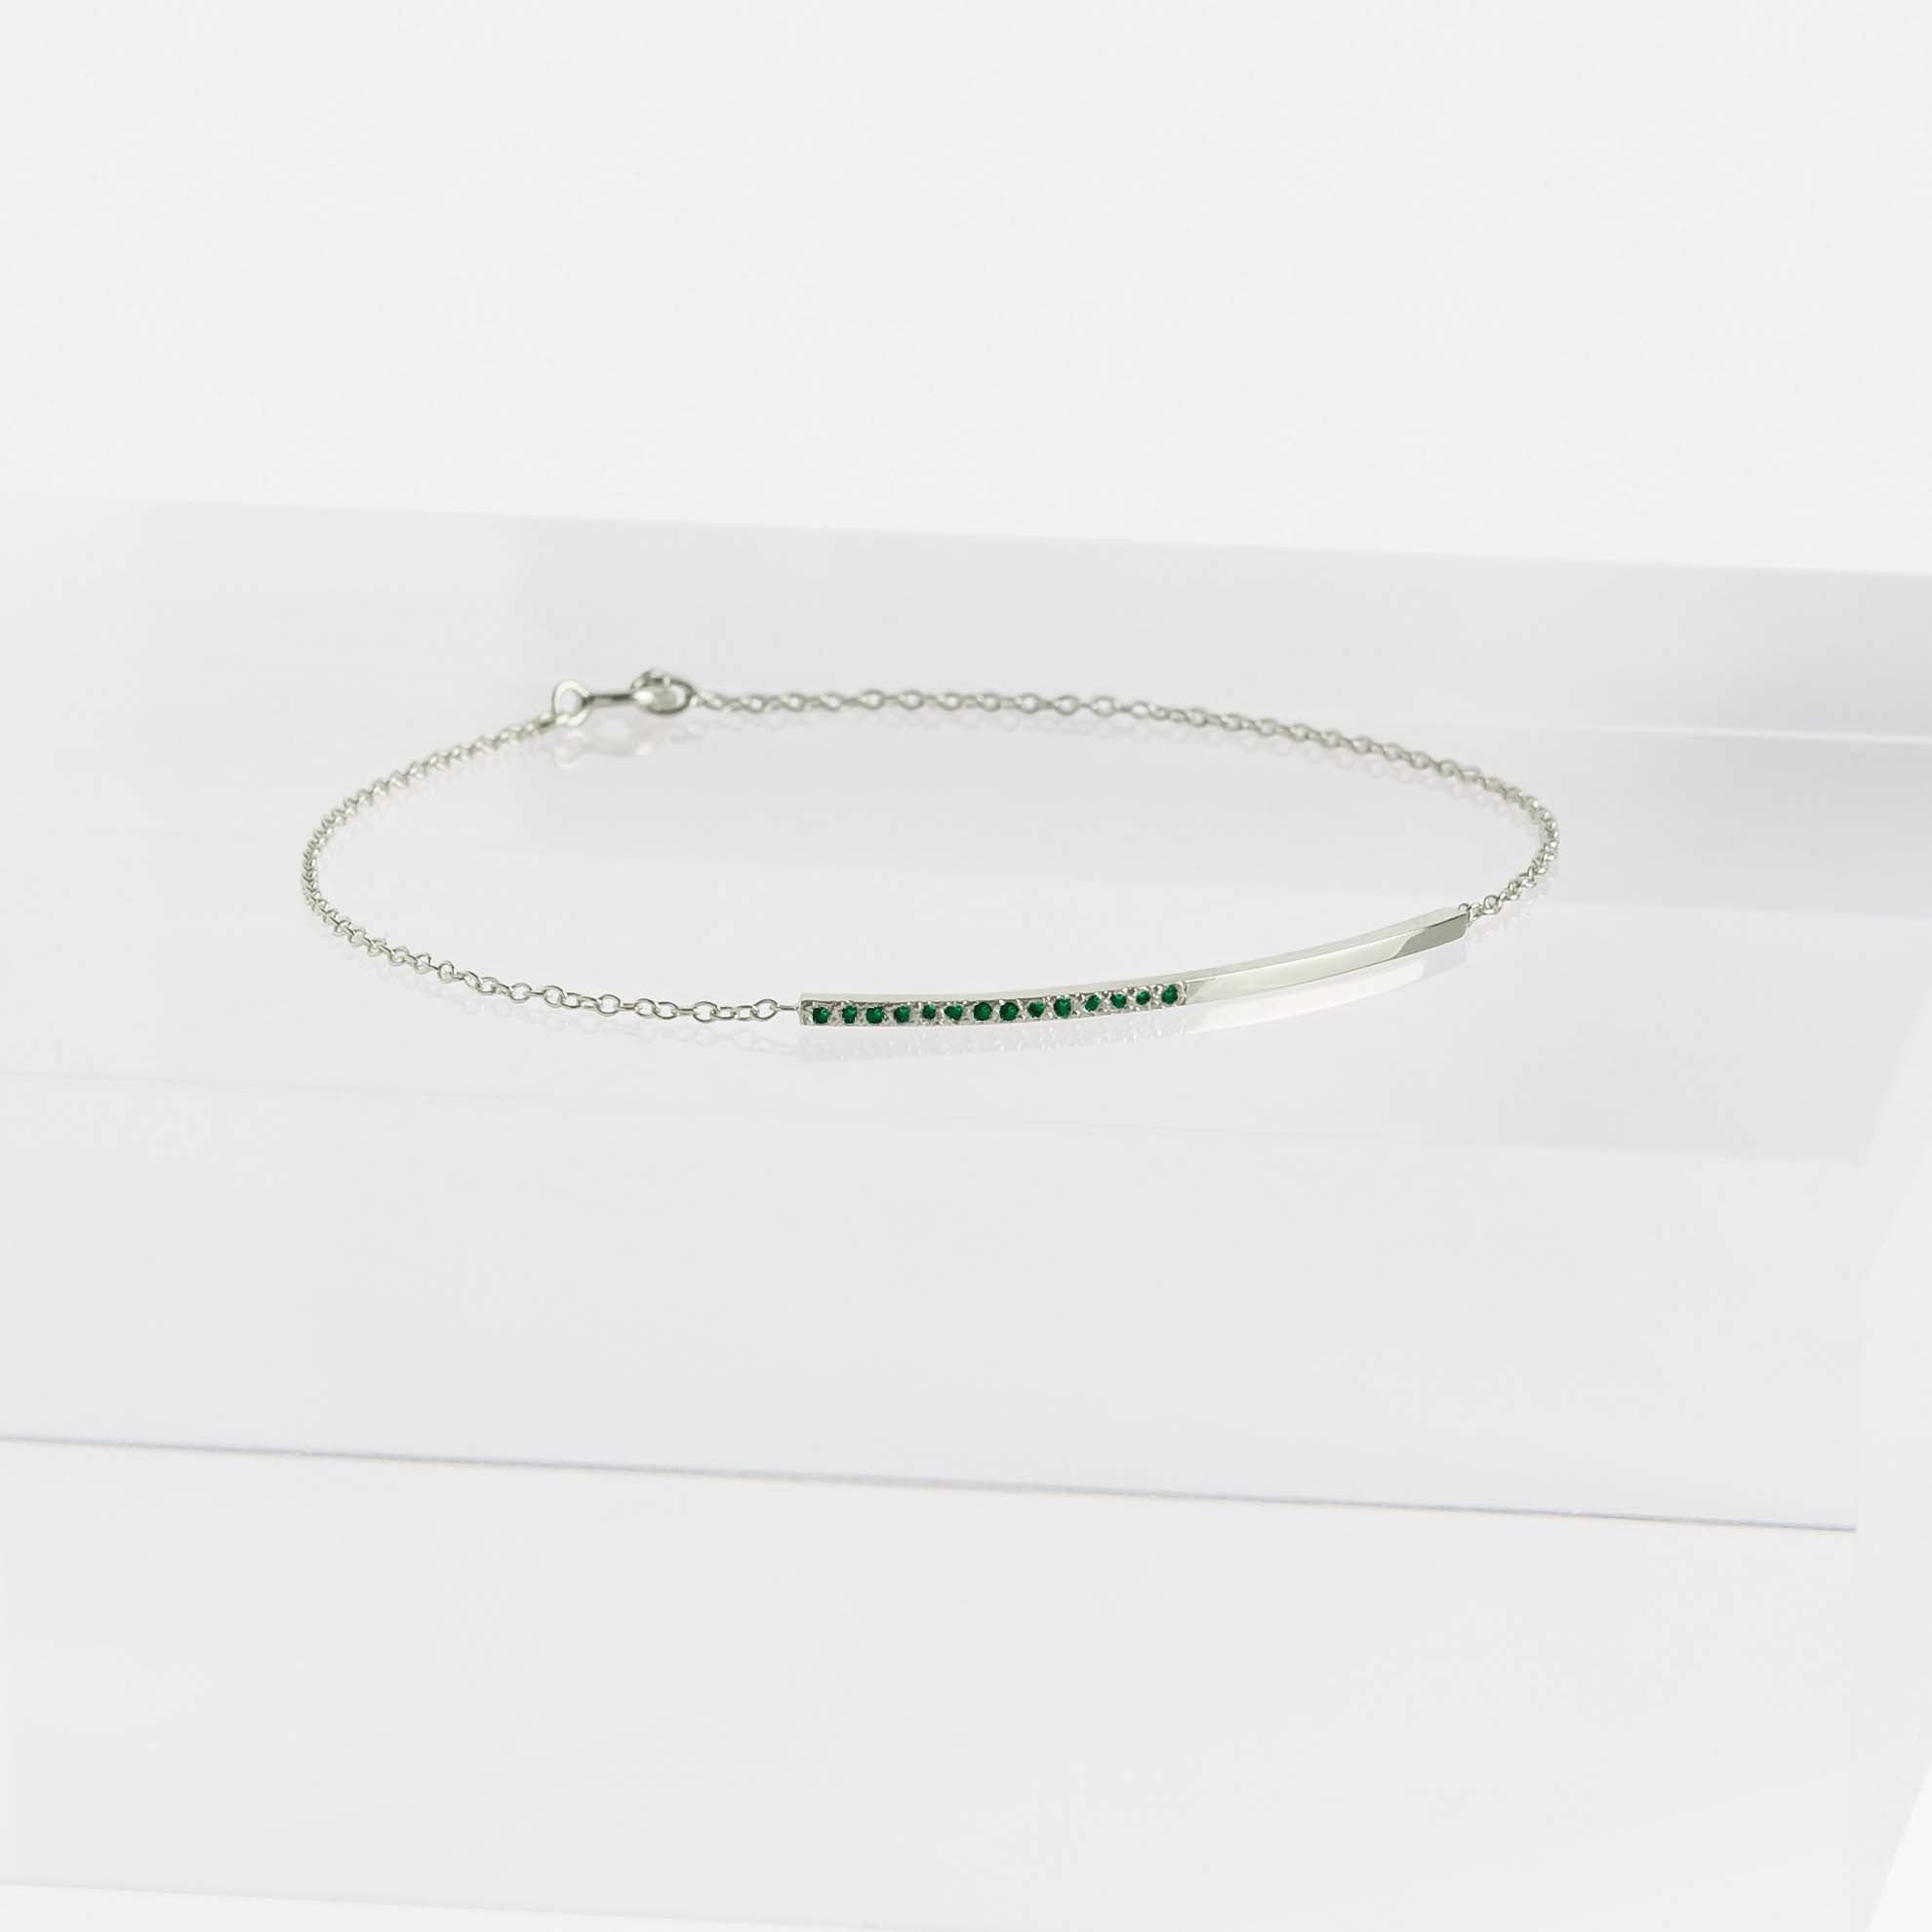 Iva Simple Bracelet in 14k White Gold set with Emeralds By SHW Fine Jewelry NYC